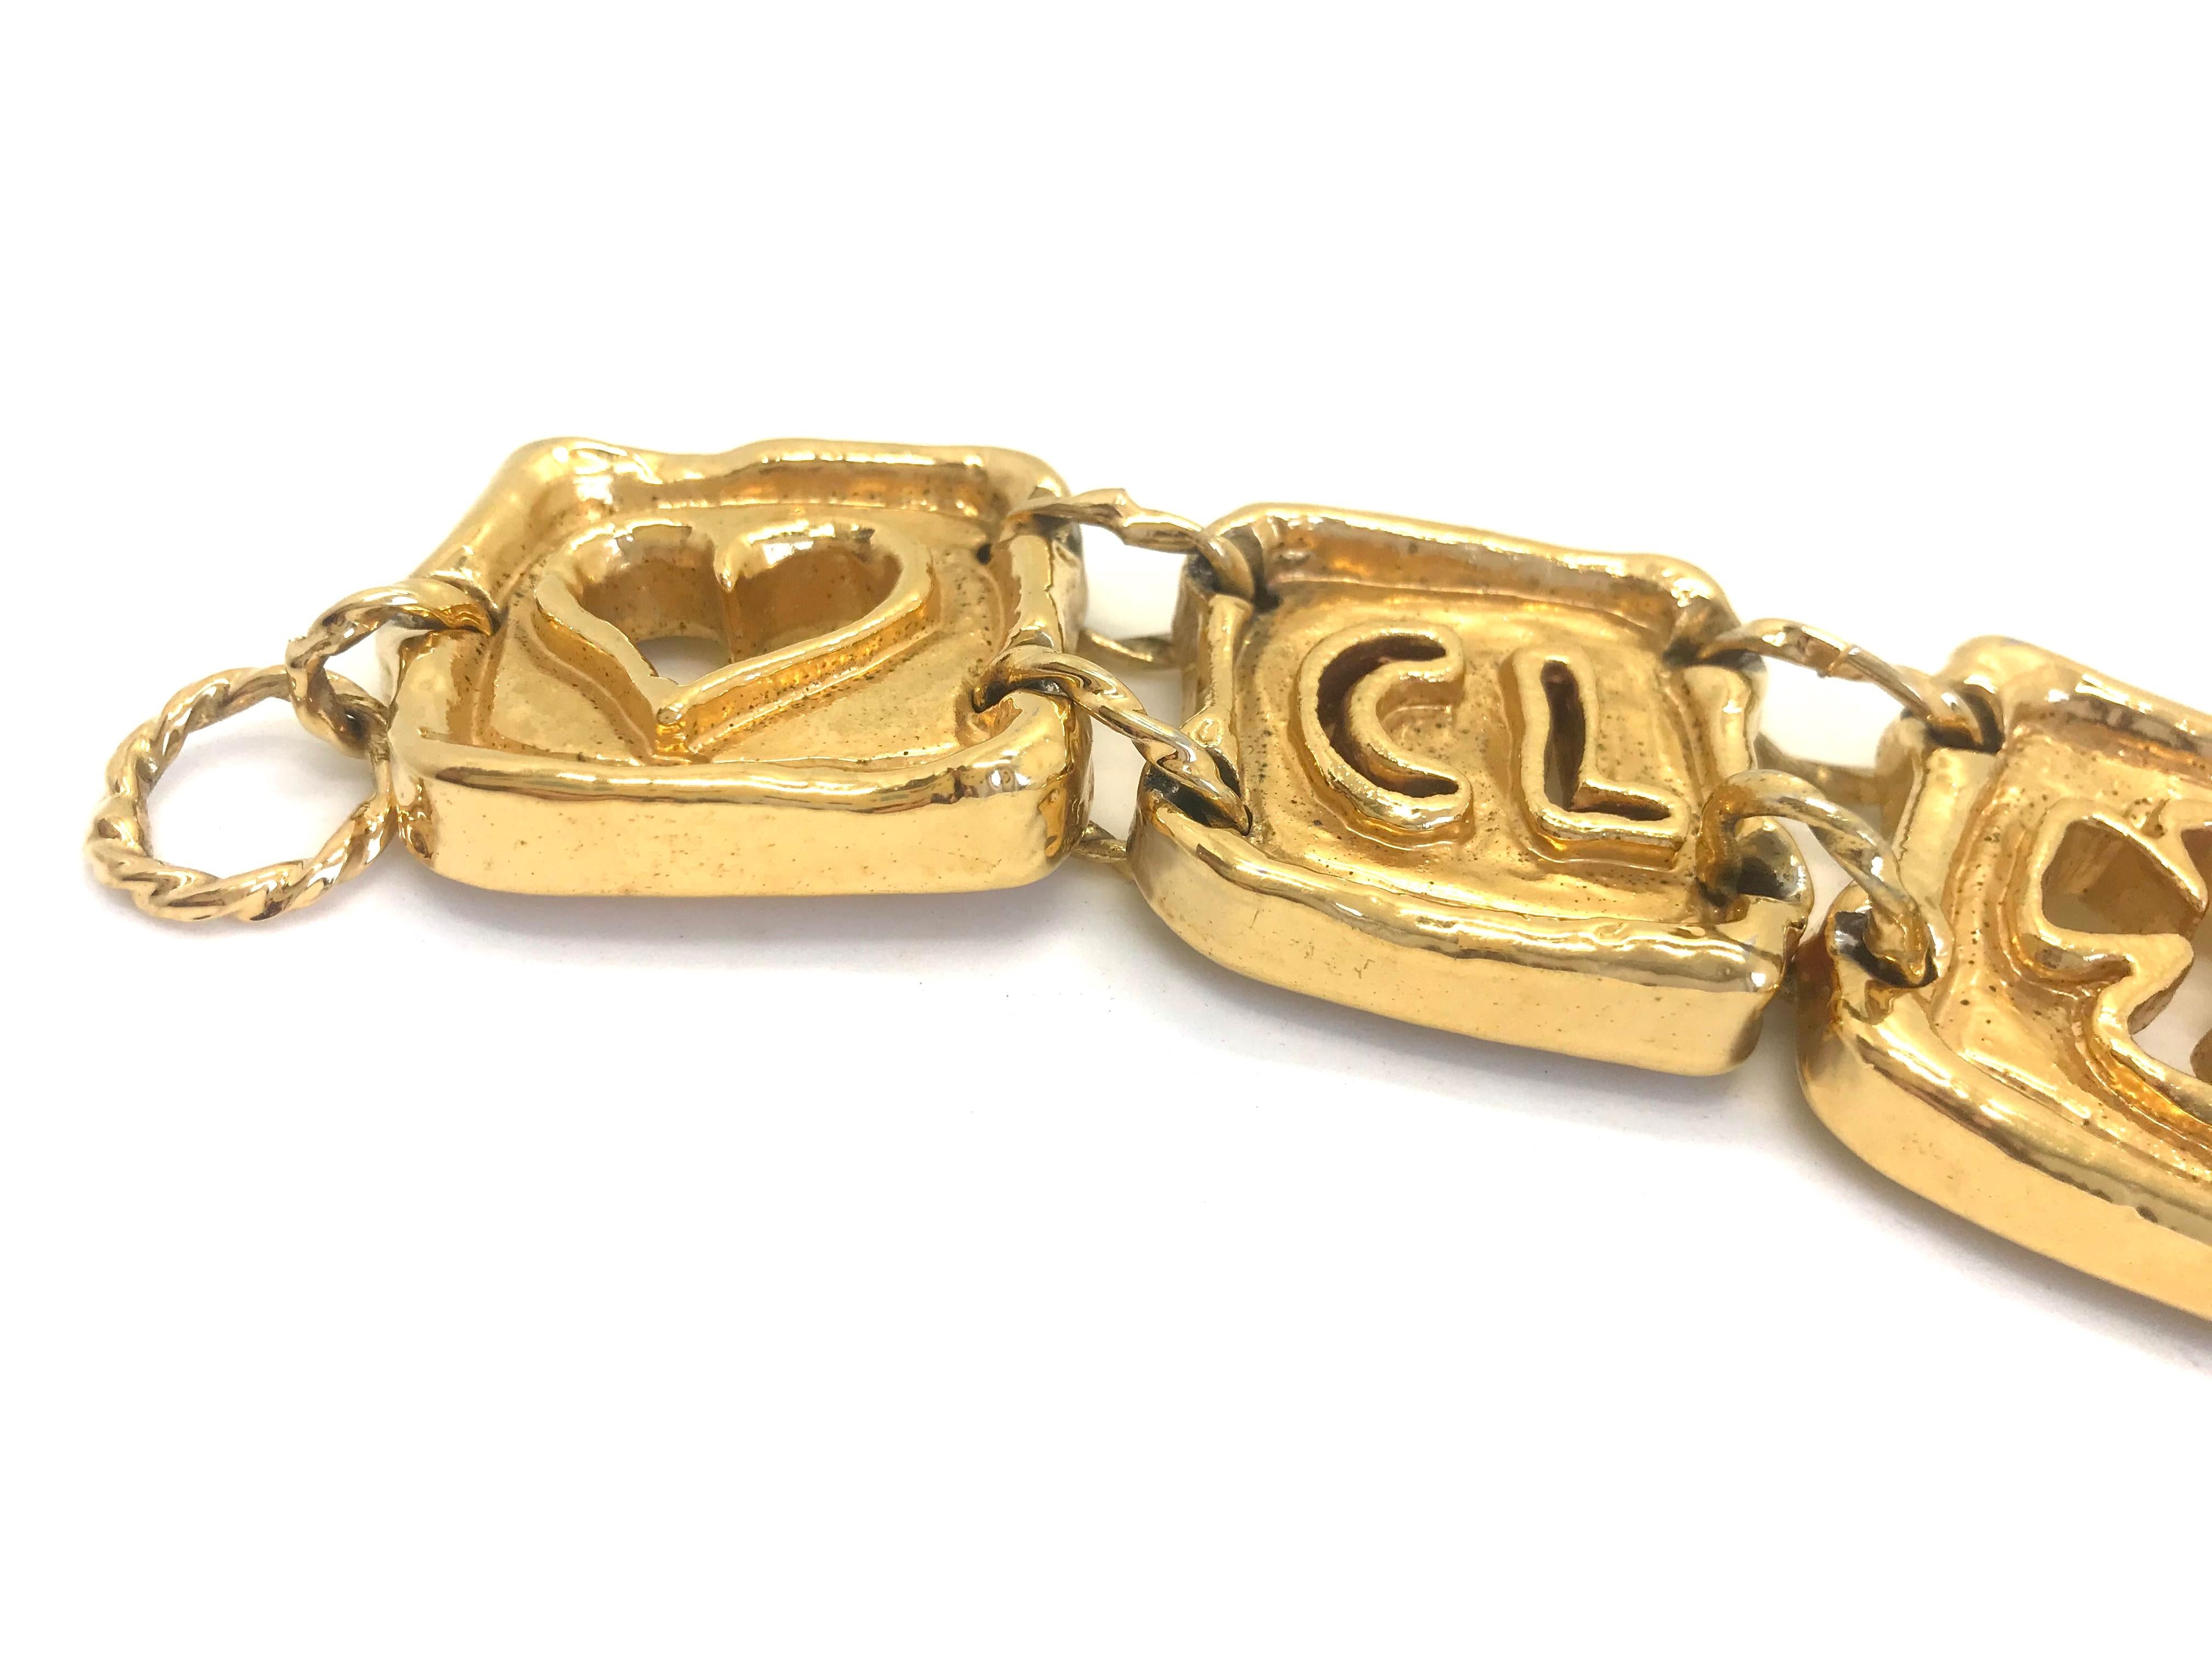 Vintage 1990s Christian Lacroix Cuff Bracelet. 

Stamped with classic Christian LaCroix manufacturers mark. 

Length (including chain) 22 cm, size of square links - approx. 4 x 4 cm.

Excellent condition